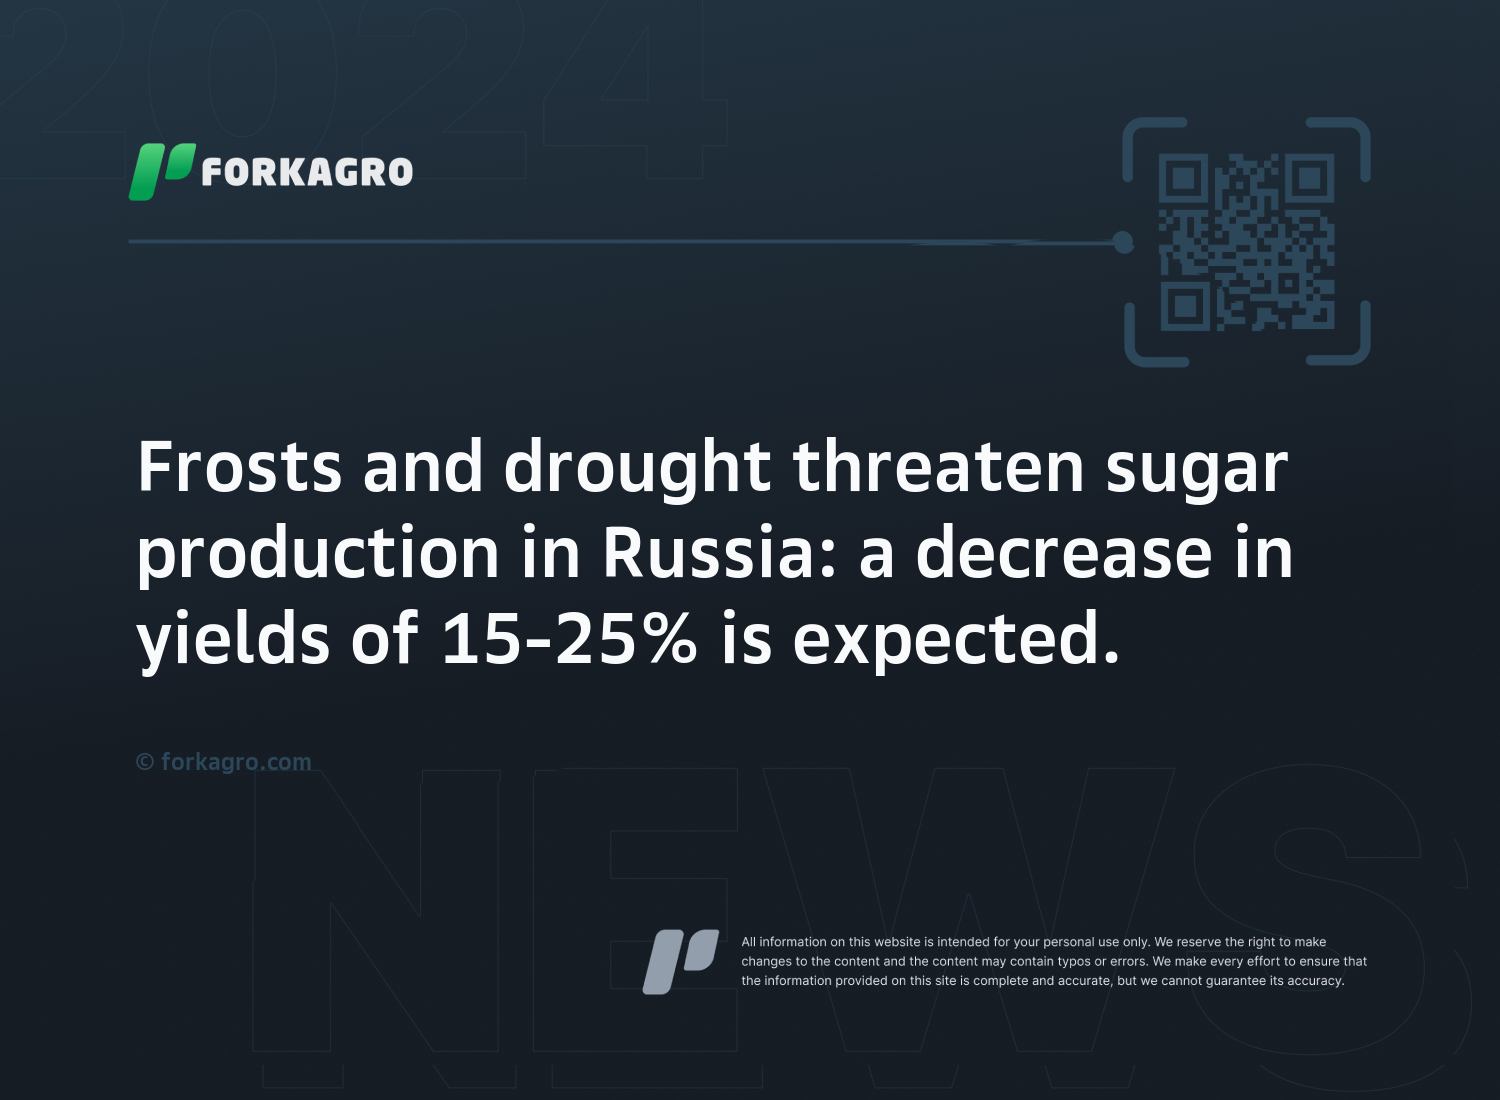 Frosts and drought threaten sugar production in Russia: a decrease in yields of 15-25% is expected.